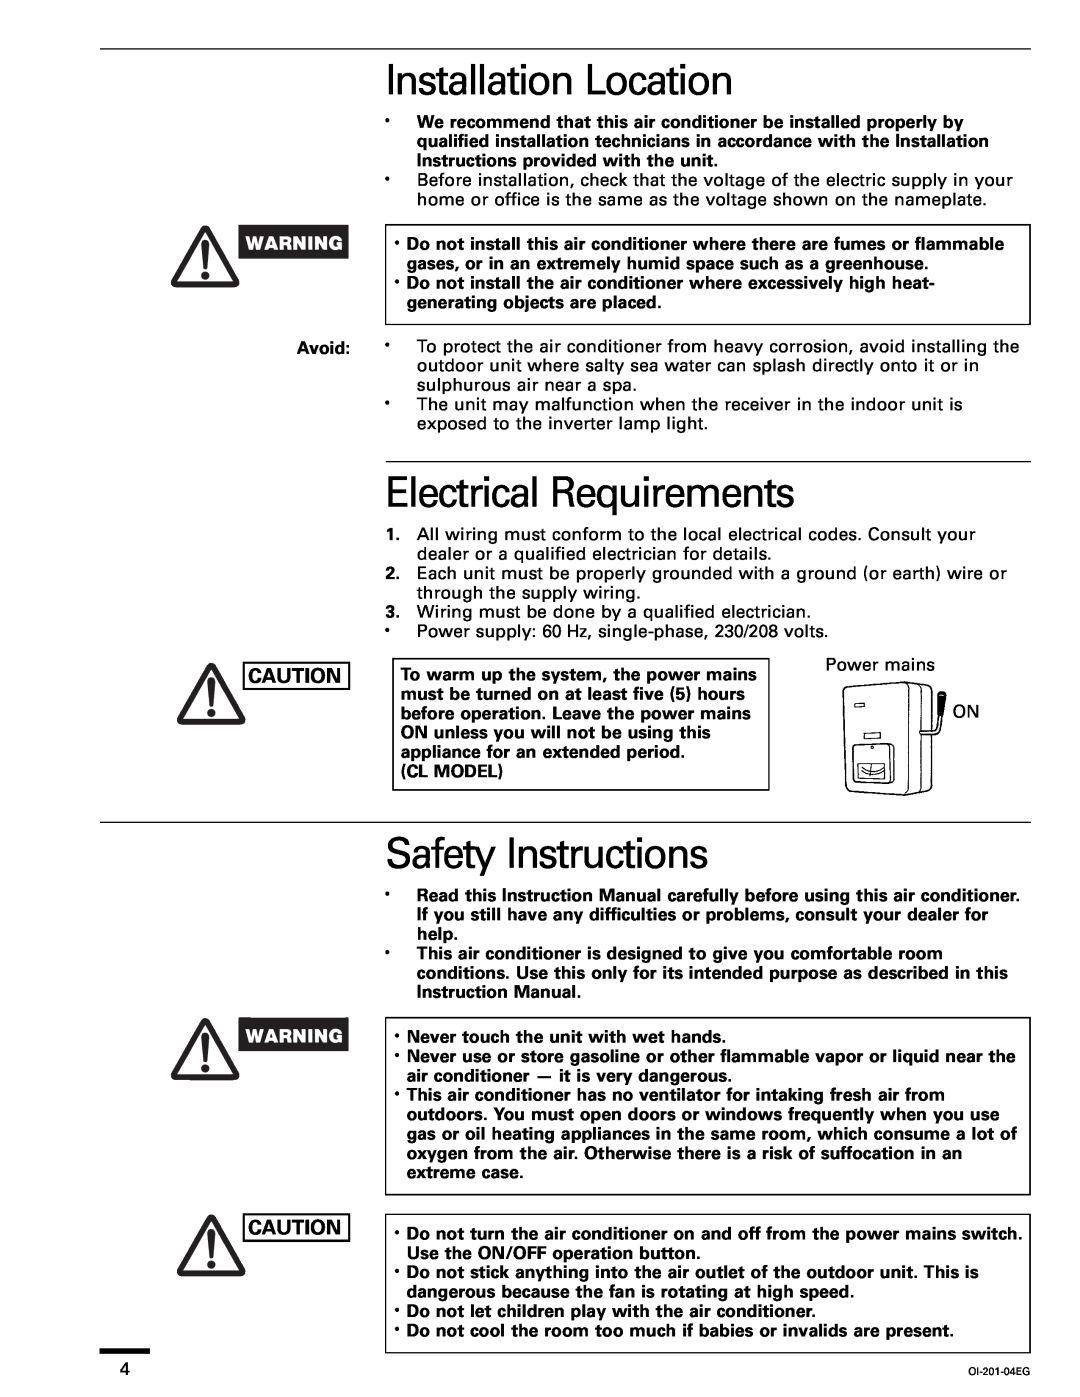 Sanyo XS1822, TS3632, TS2432, TS4232, XS2432, XS4232 Installation Location, Electrical Requirements, Safety Instructions 